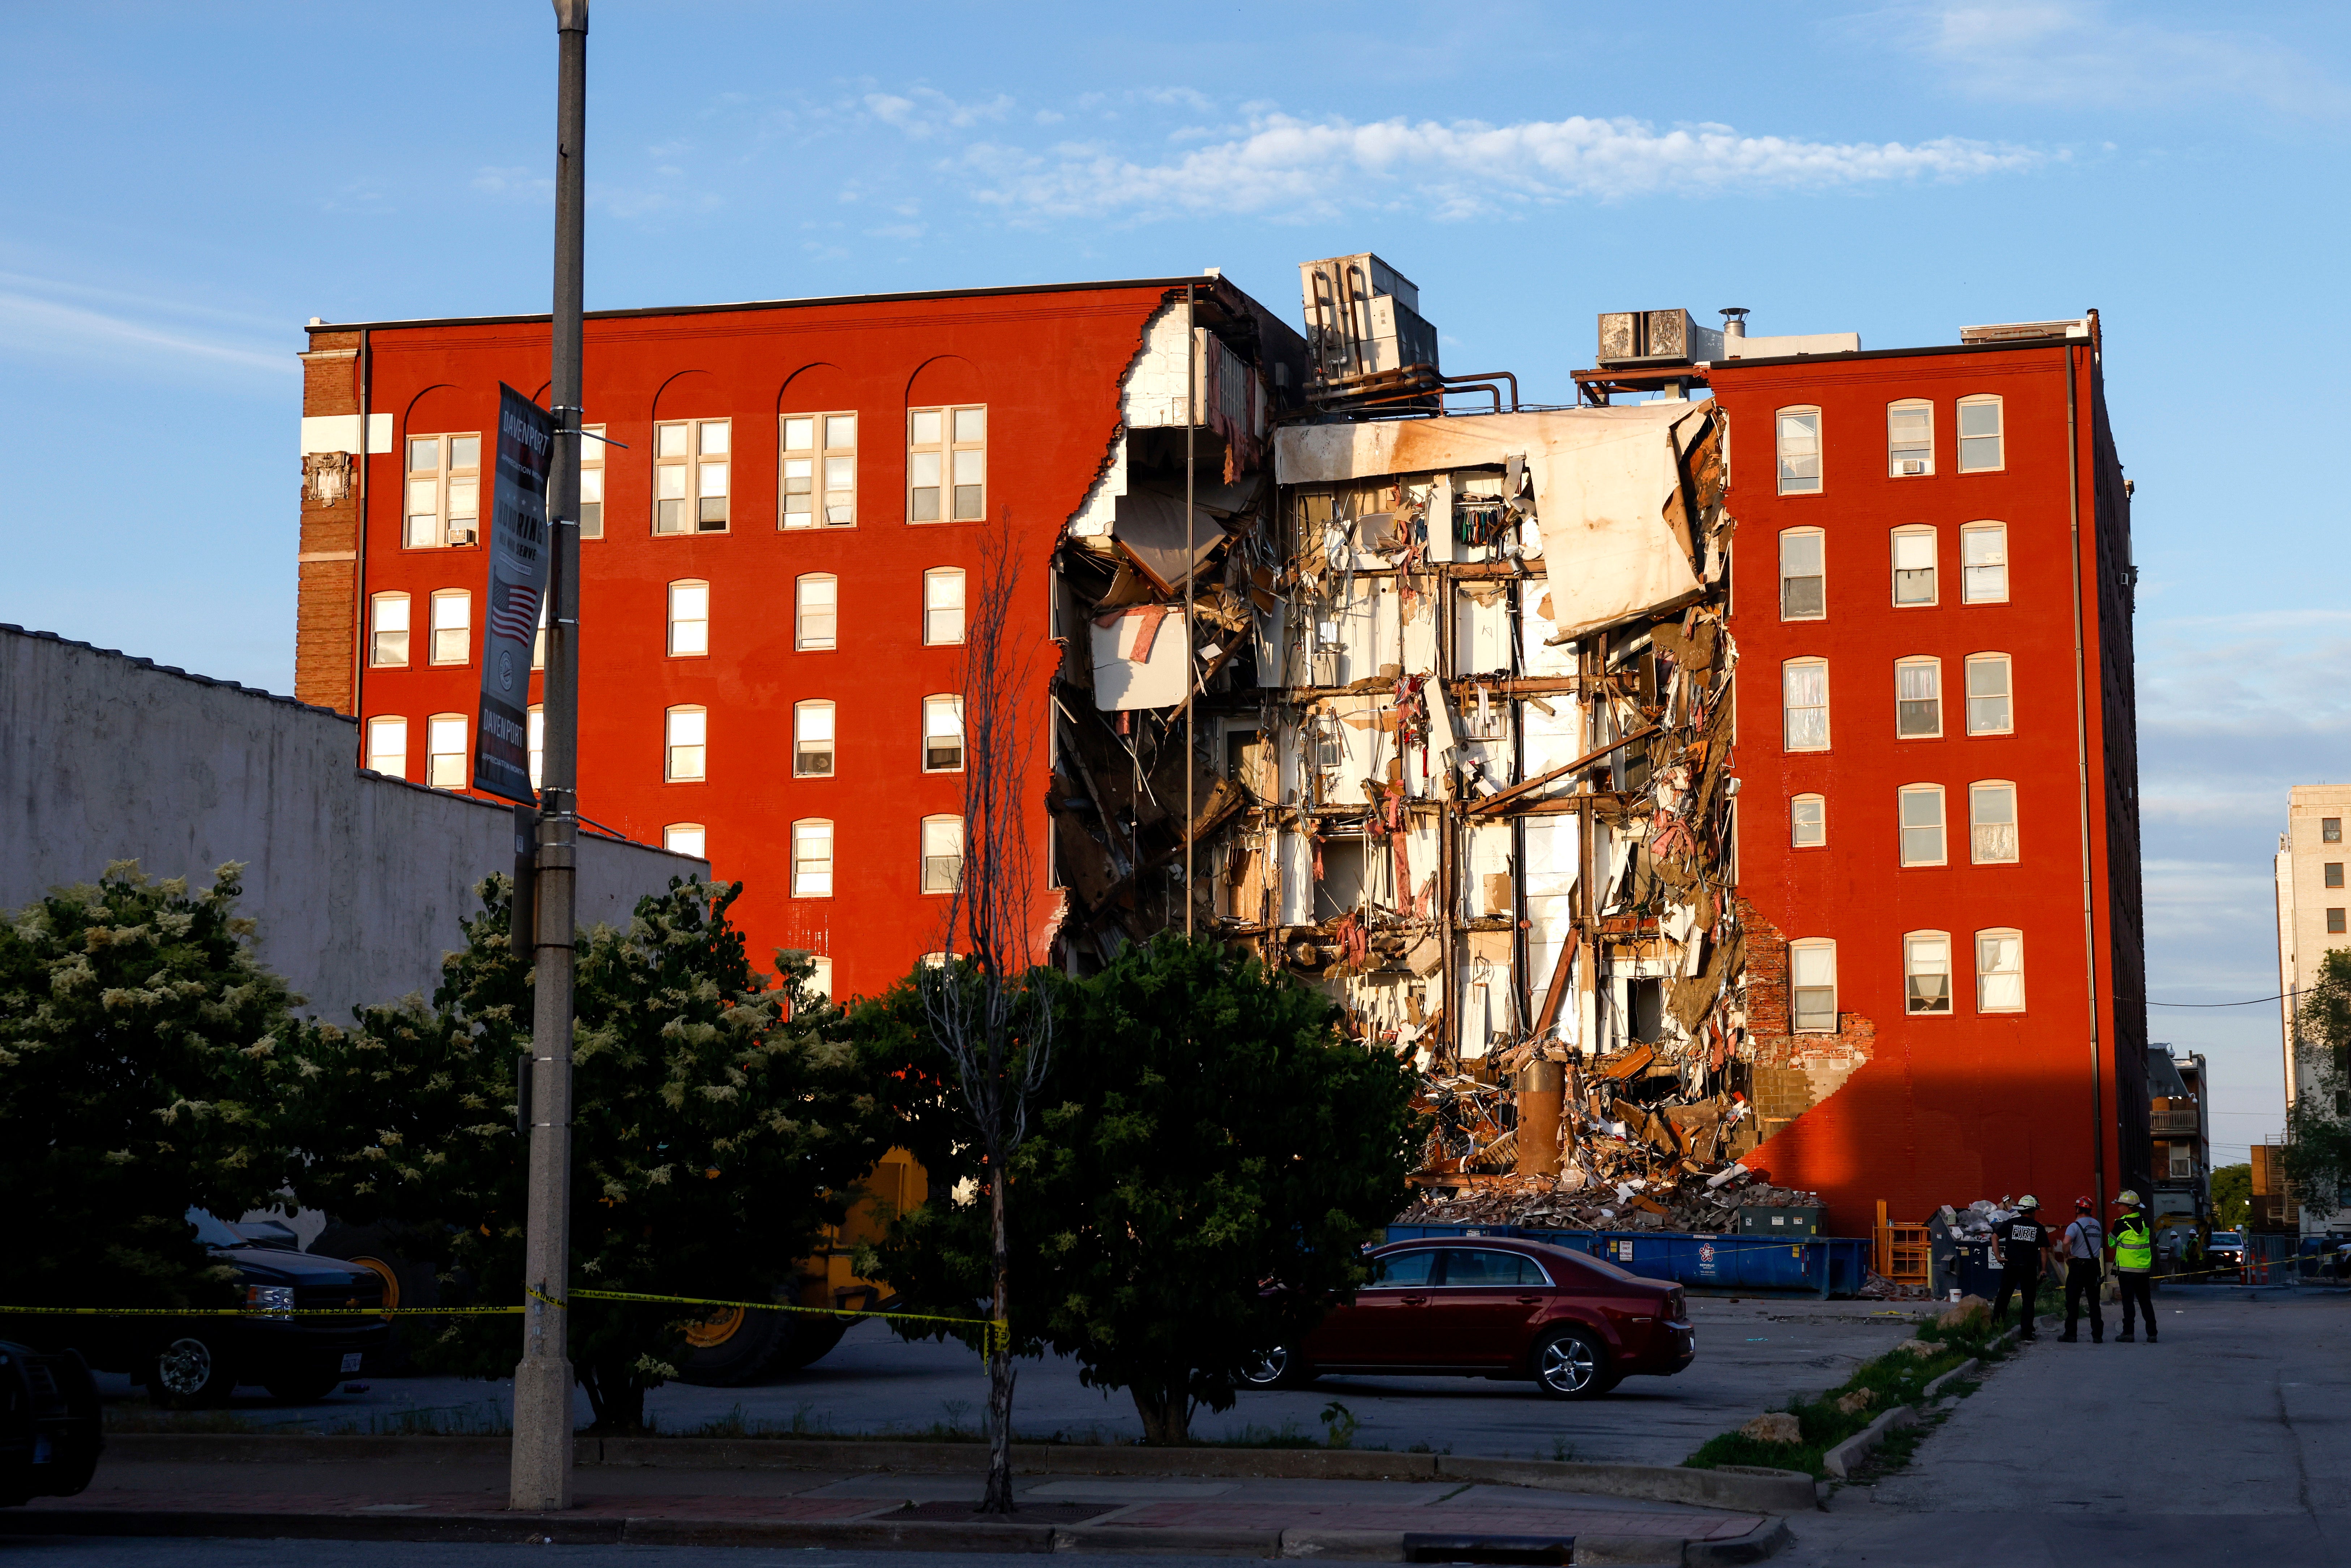 Emergency crews at the scene of a building collapse in Davenport, Iowa